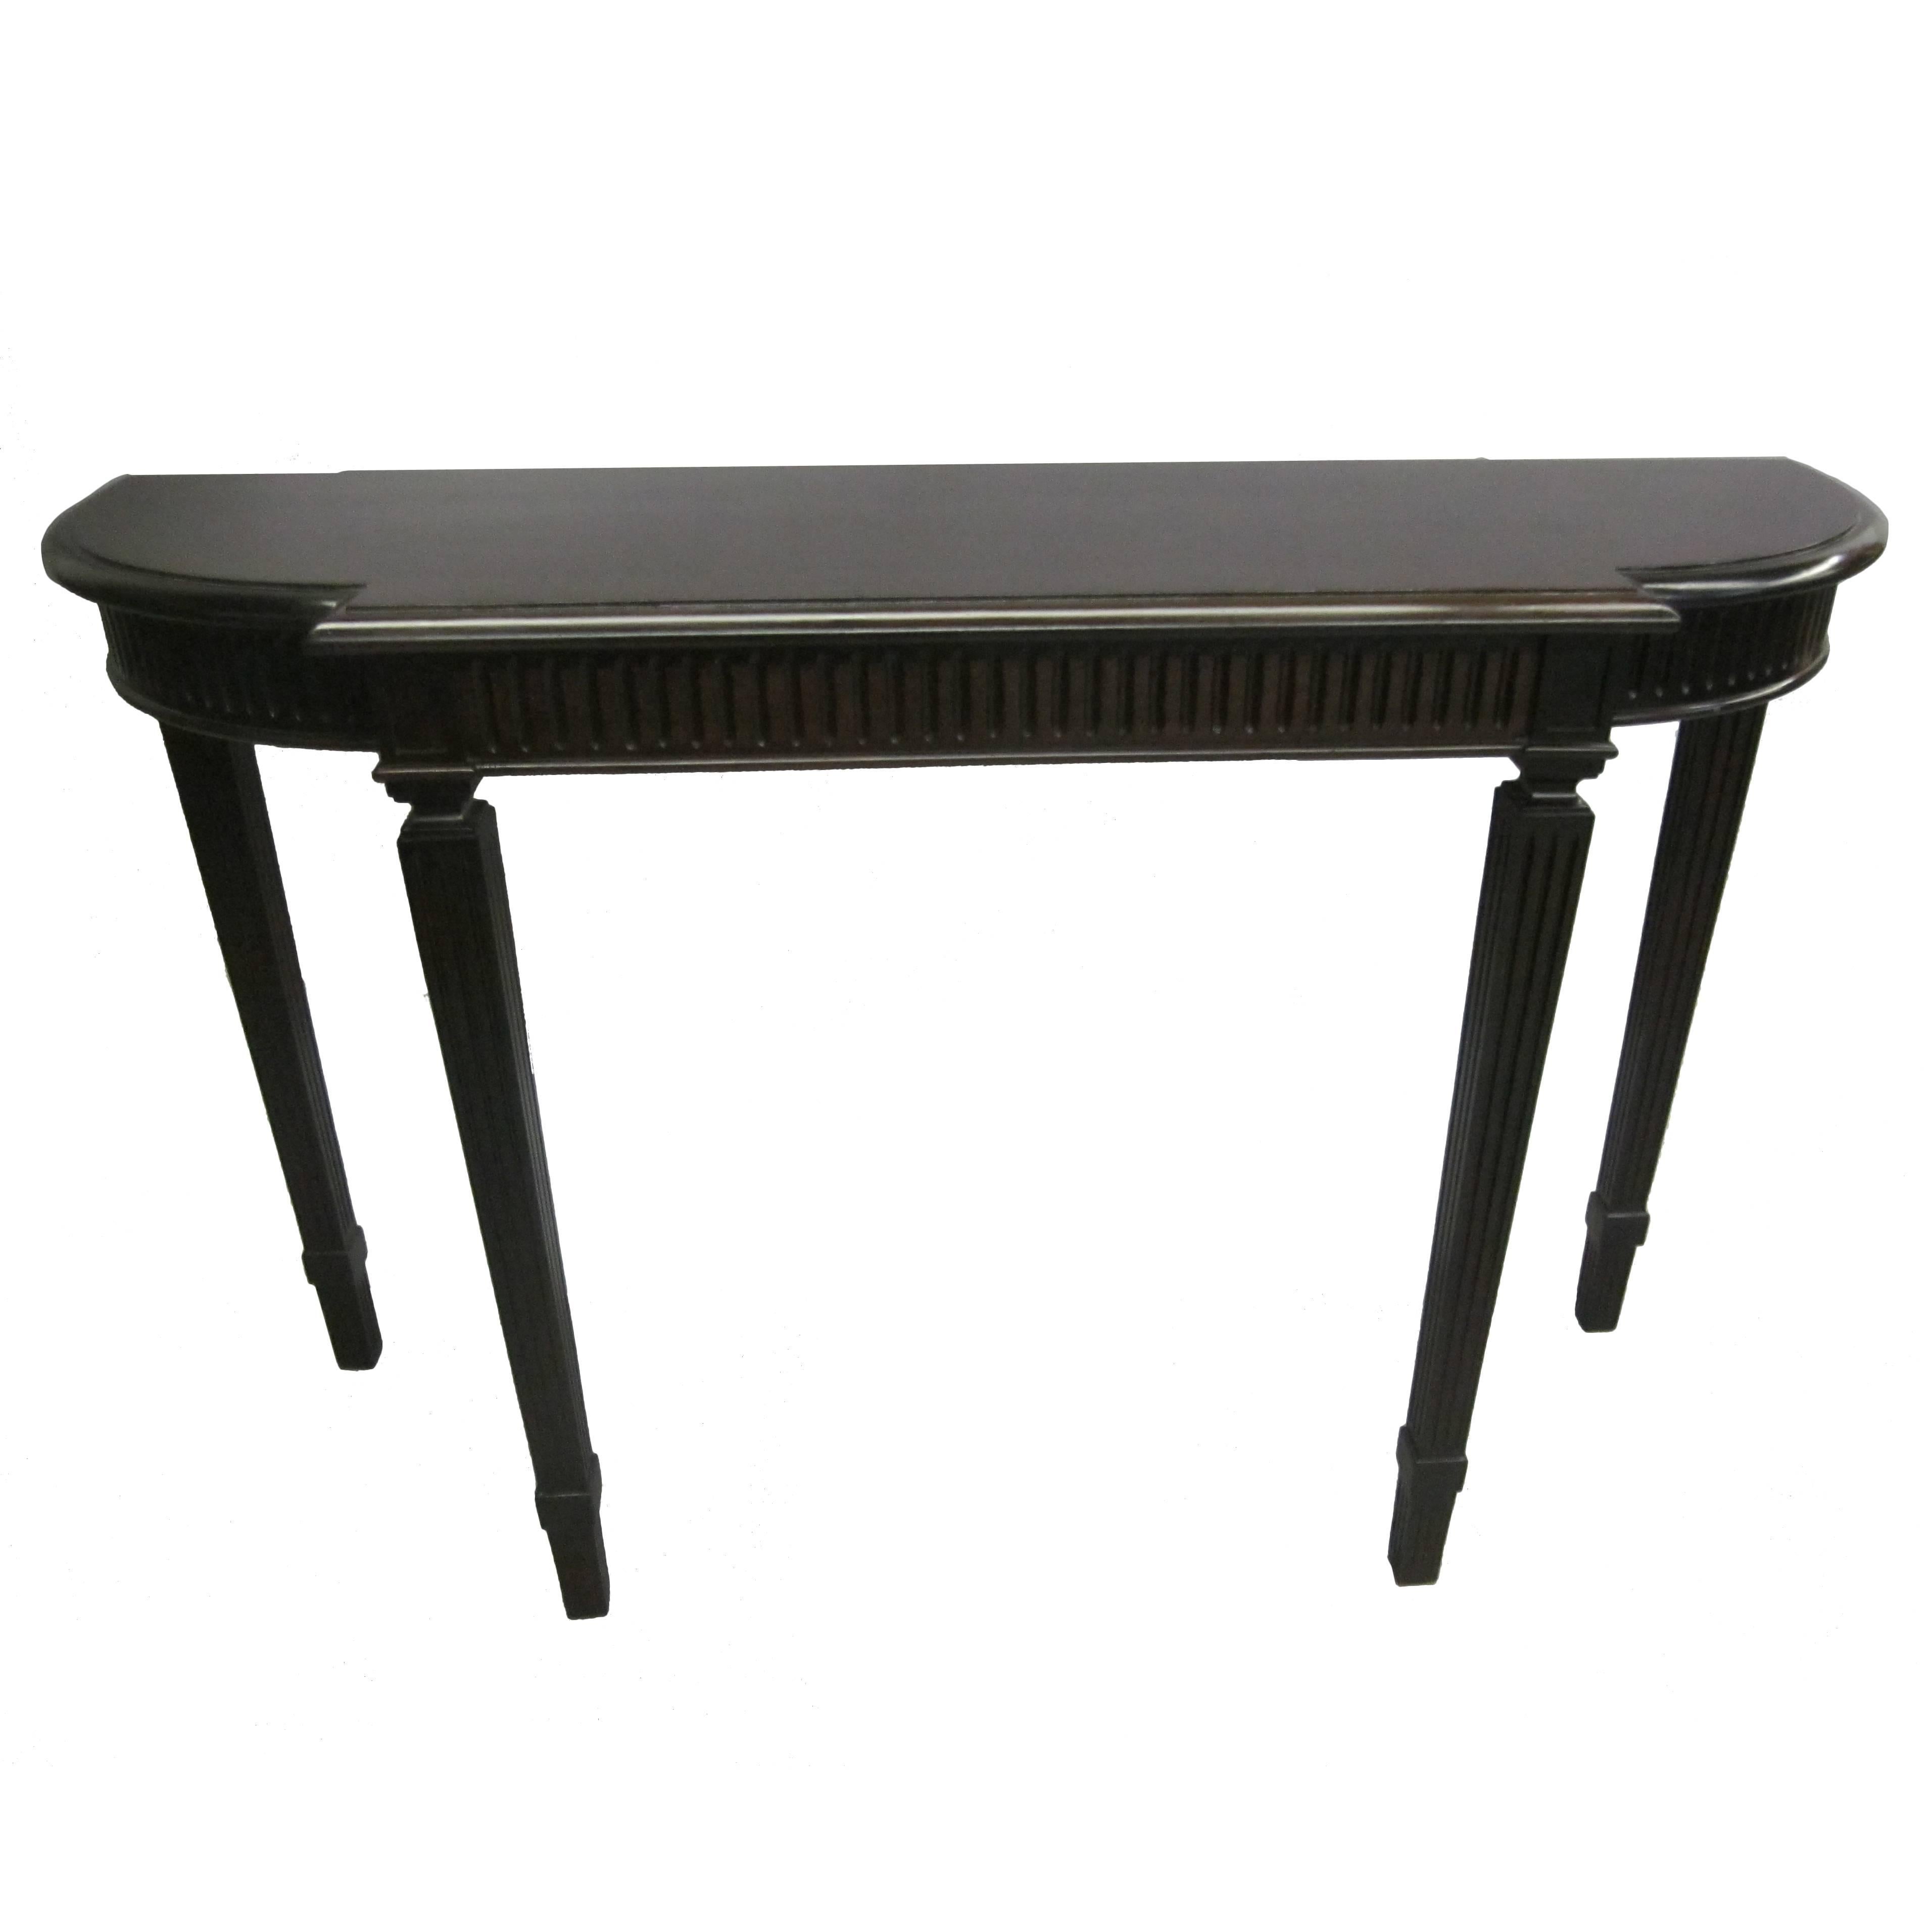 Italian Modern Neoclassical Console Table in the Manner of Paolo Buffa For Sale